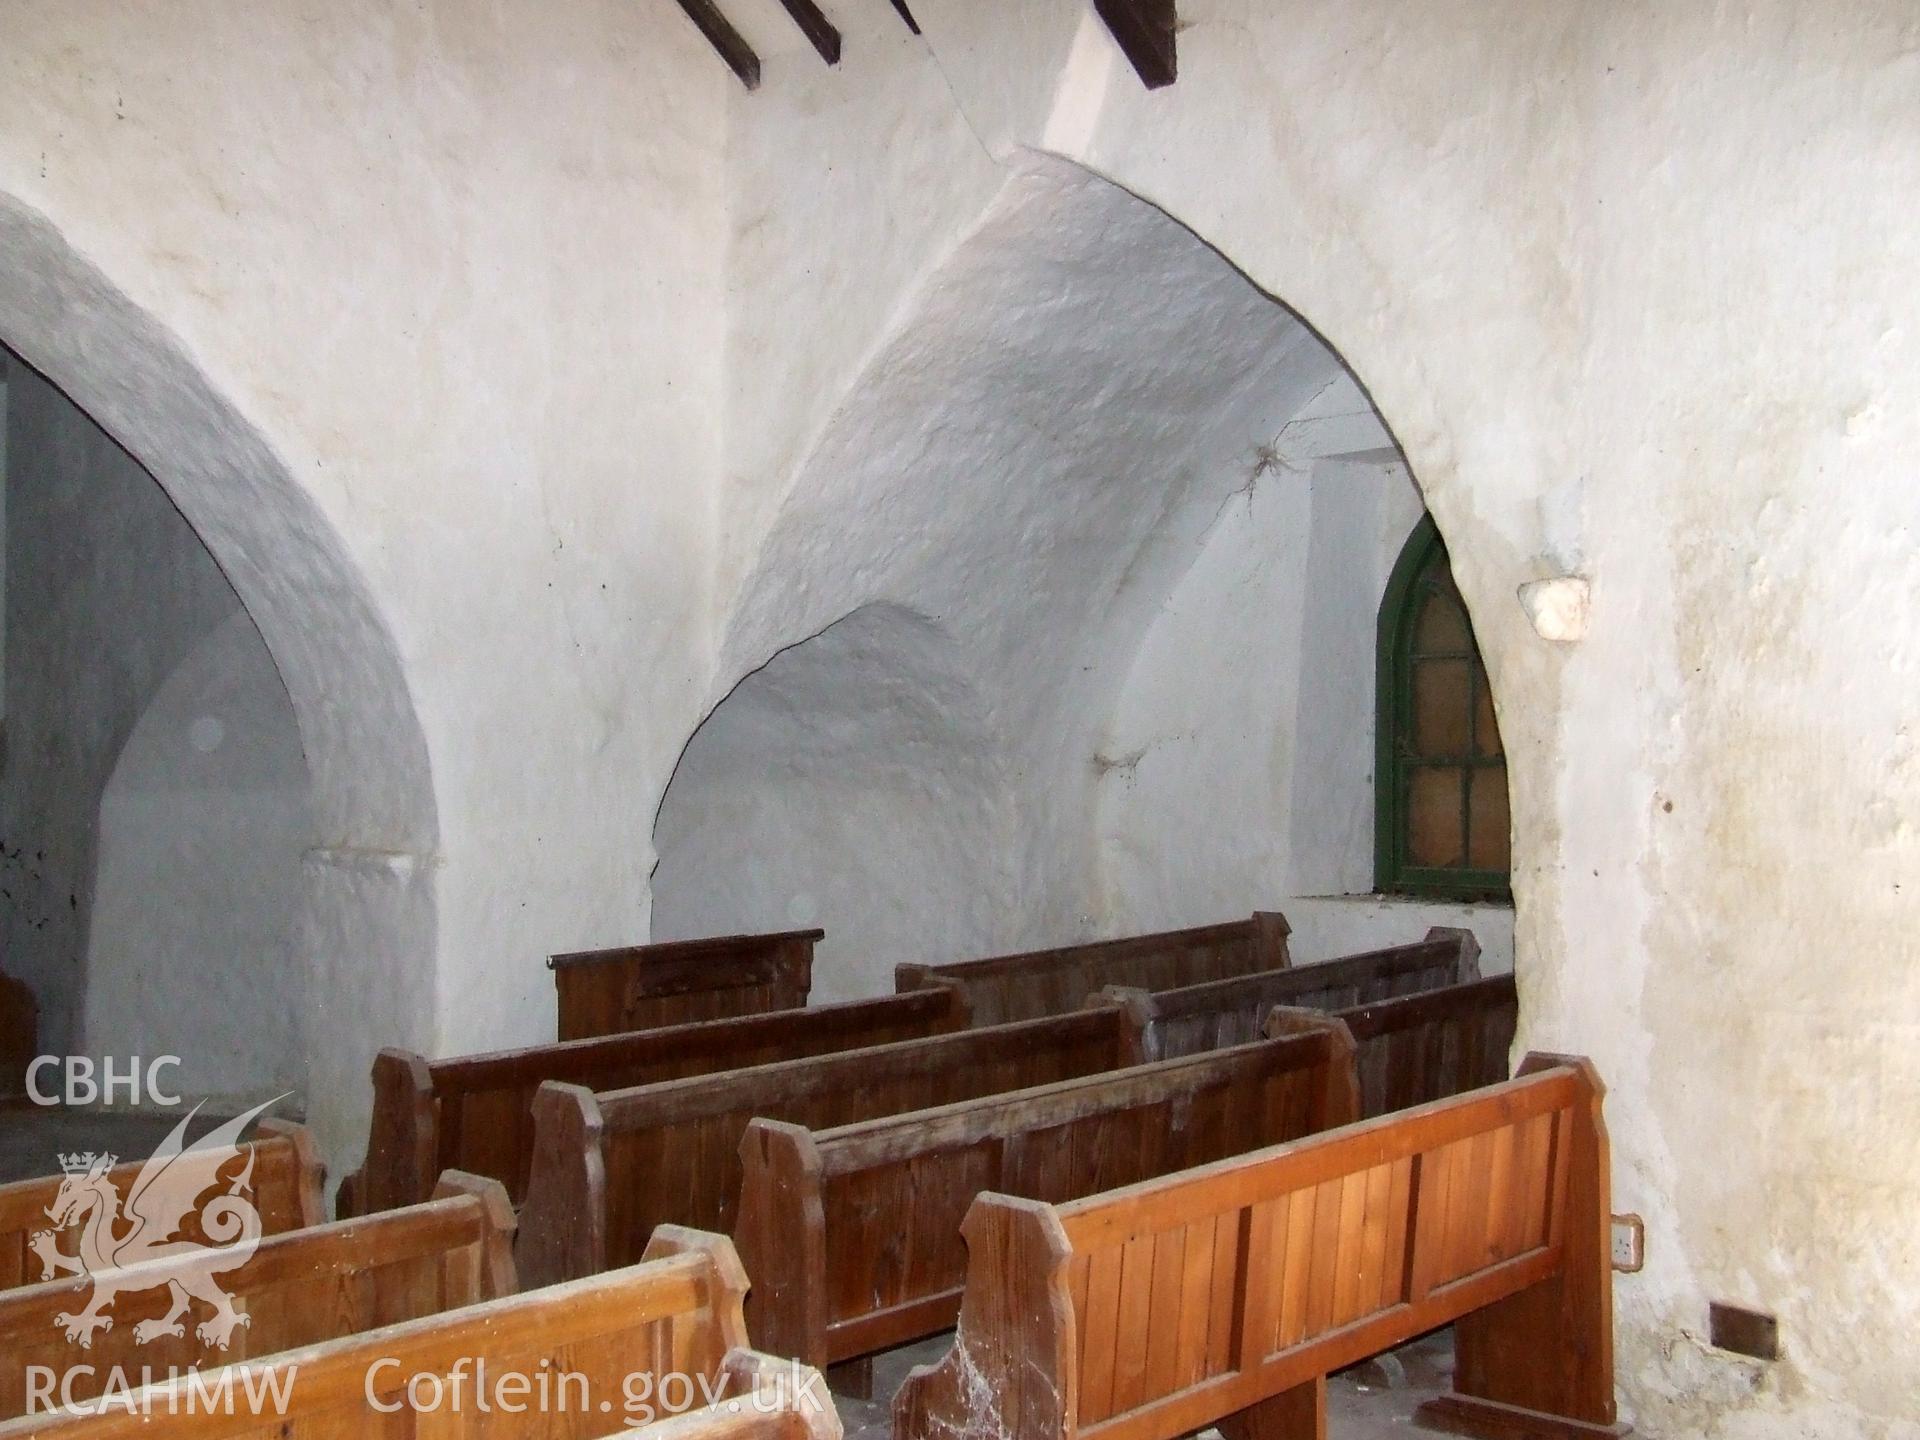 Digital colour photograph showing the transept and skew passage looking SE at St Justinian's Church, Llanstinian. Produced by Martin Davies in 2022.